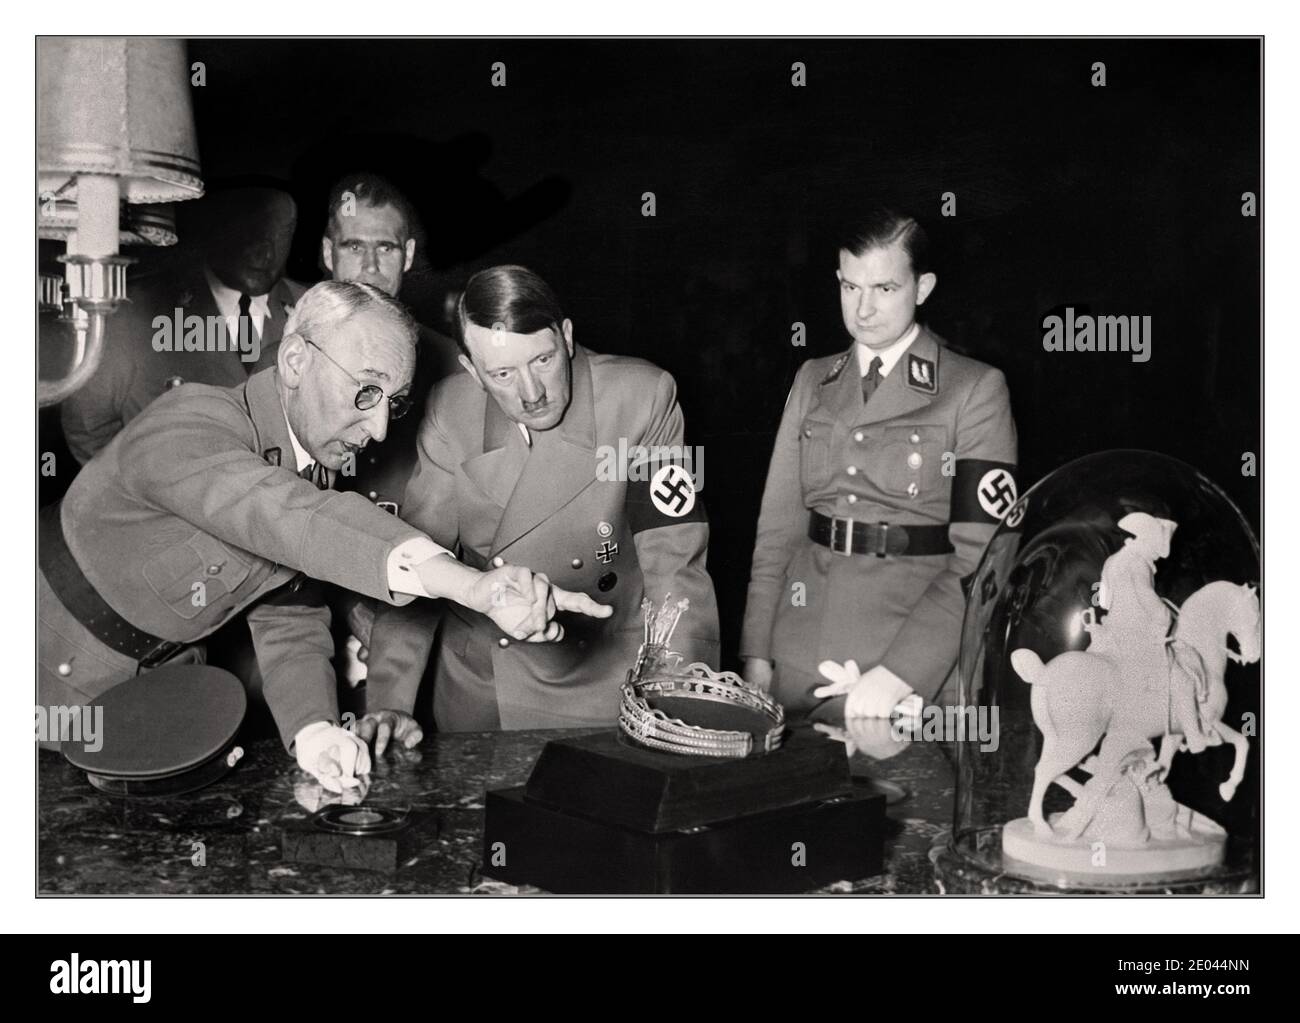 HITLER ART LOOT 1940 WW2 German Nazi chancellor Adolf Hitler looking at a tiara and a sculpture of Napoleon Bonaparte during his visit to a collection of looted art, for his personal collection Rudolf Hess stands in the background. Stock Photo